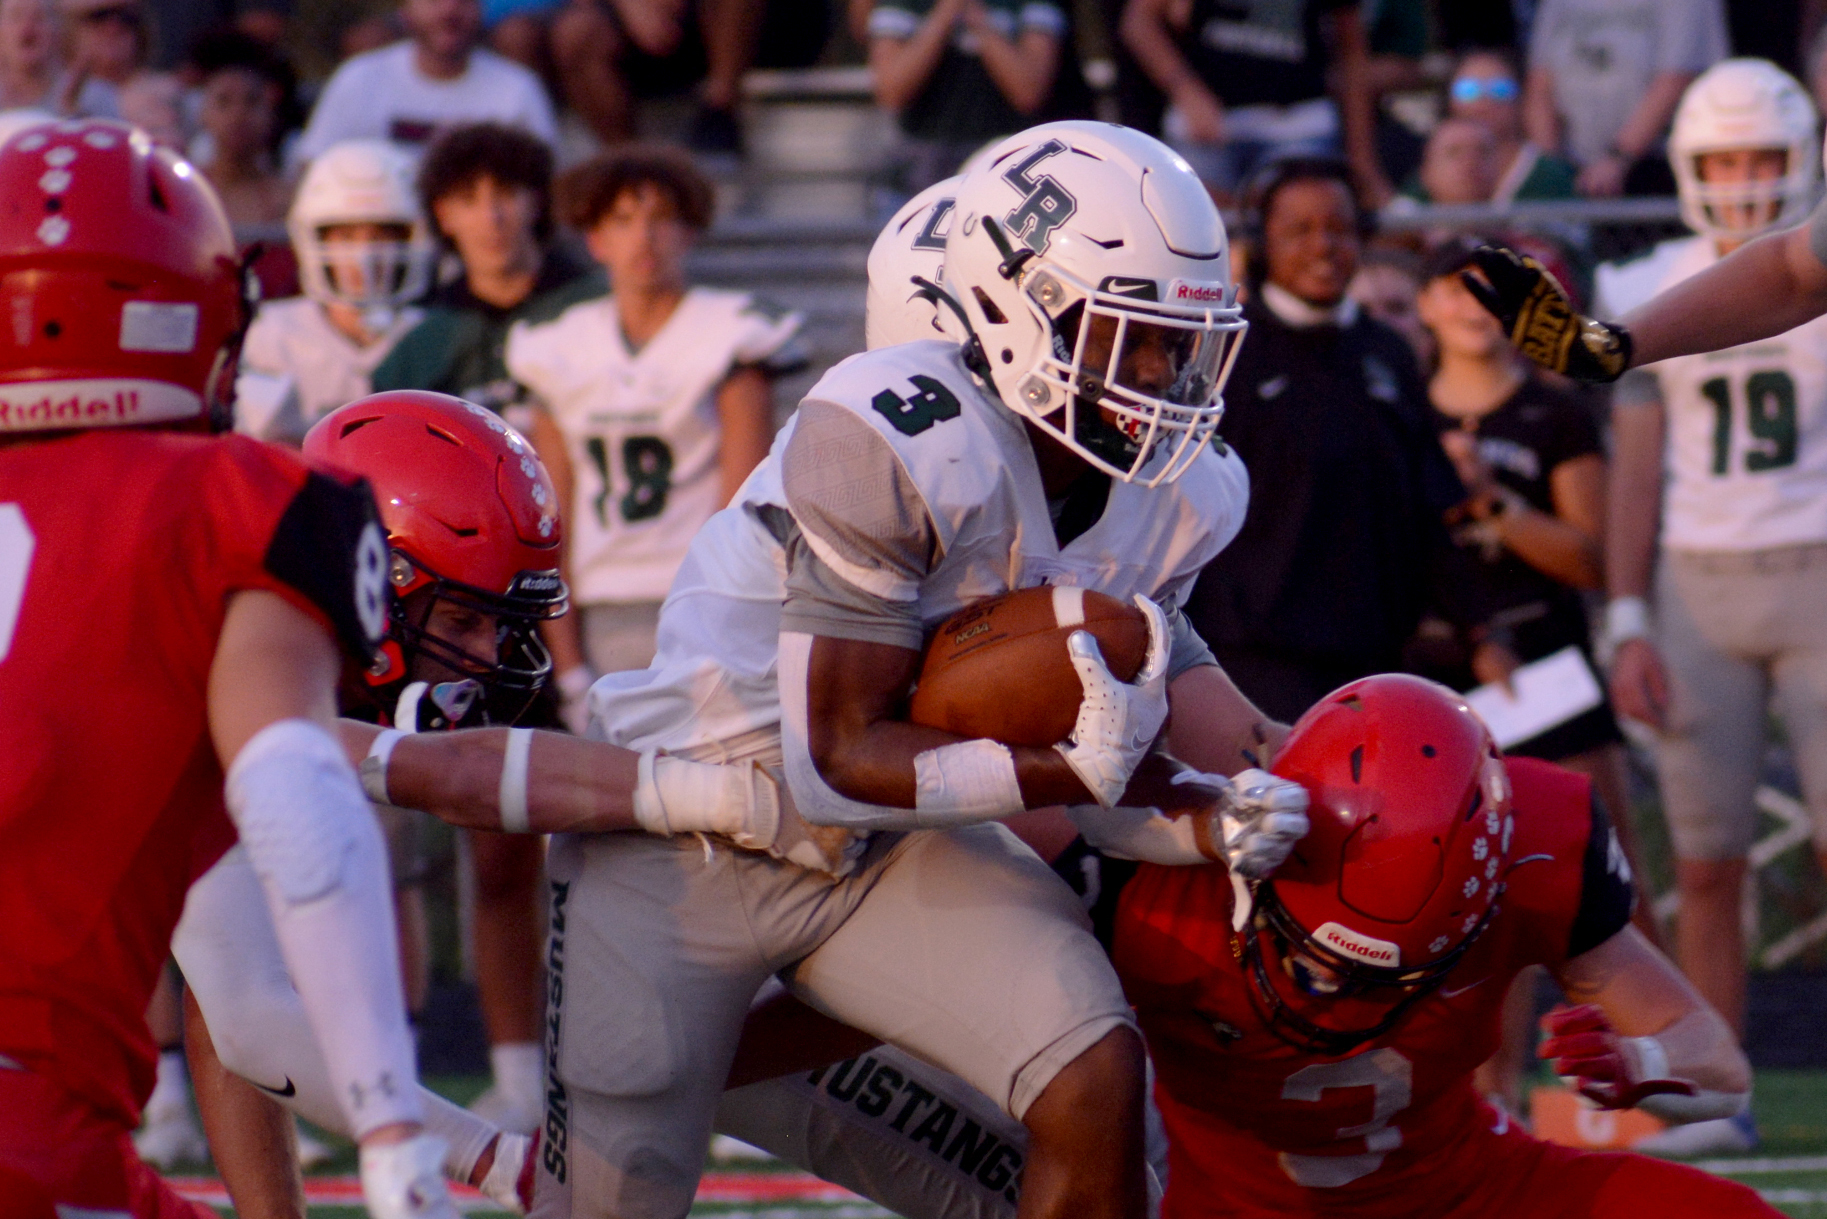 Lakewood Ranch High running back Kevin Everhart (3) ran for 931 yards and 13 touchdowns in 2021. (File photo)